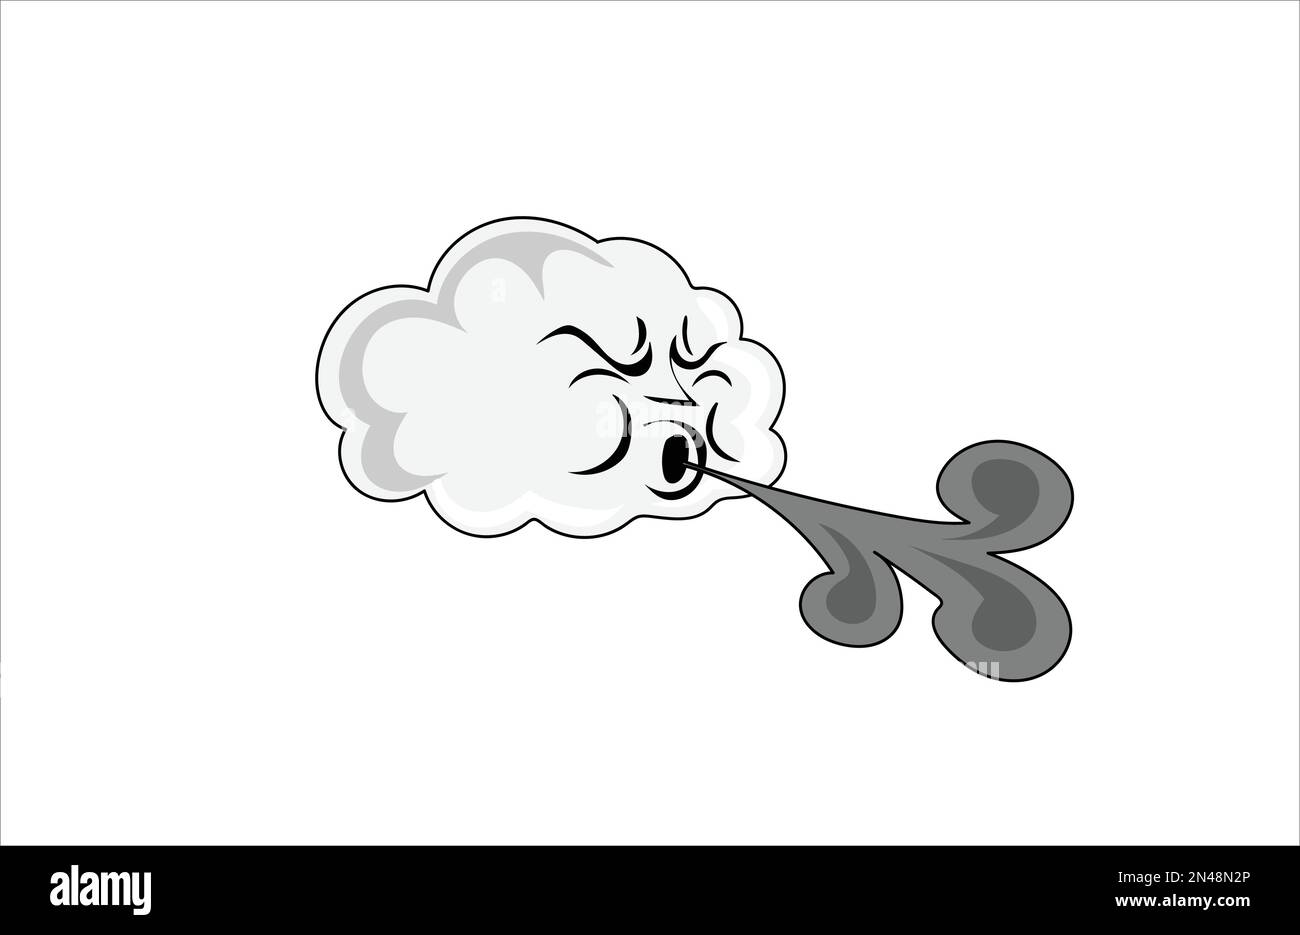 Windy day cloud blowing vector illustration Stock Vector